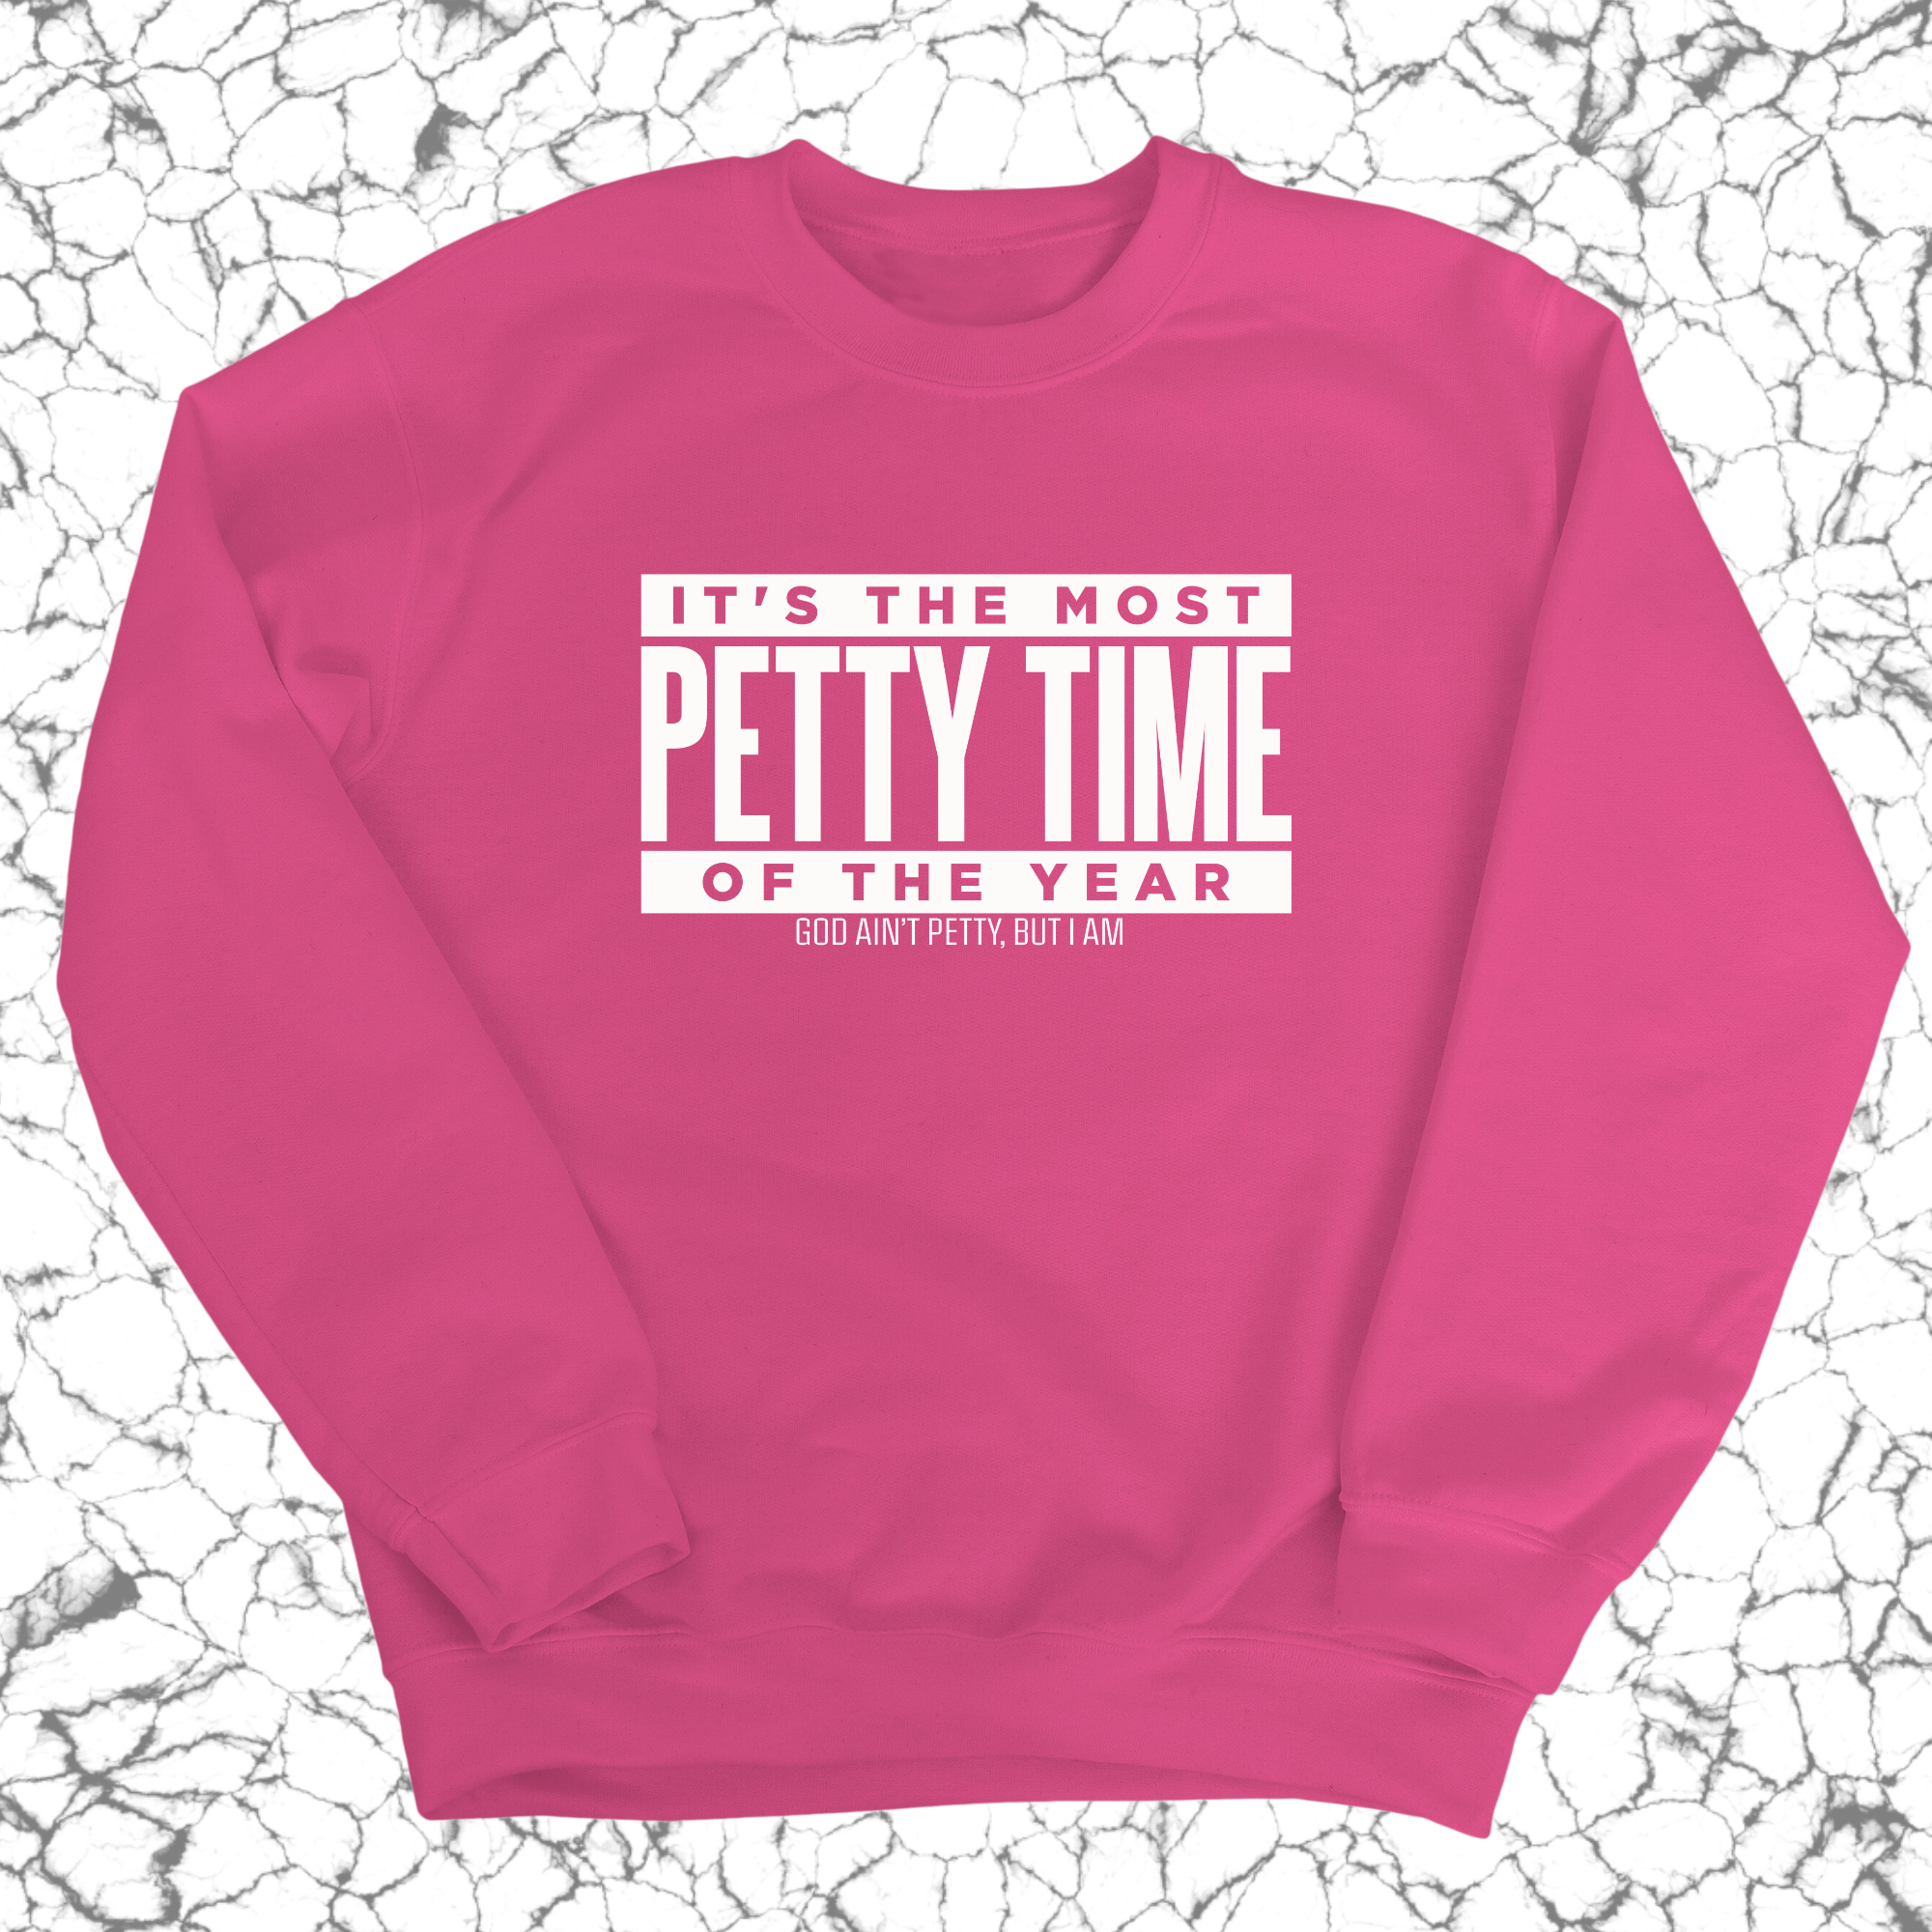 It's the Most Petty time of the Year Unisex Sweatshirt-Sweatshirt-The Original God Ain't Petty But I Am